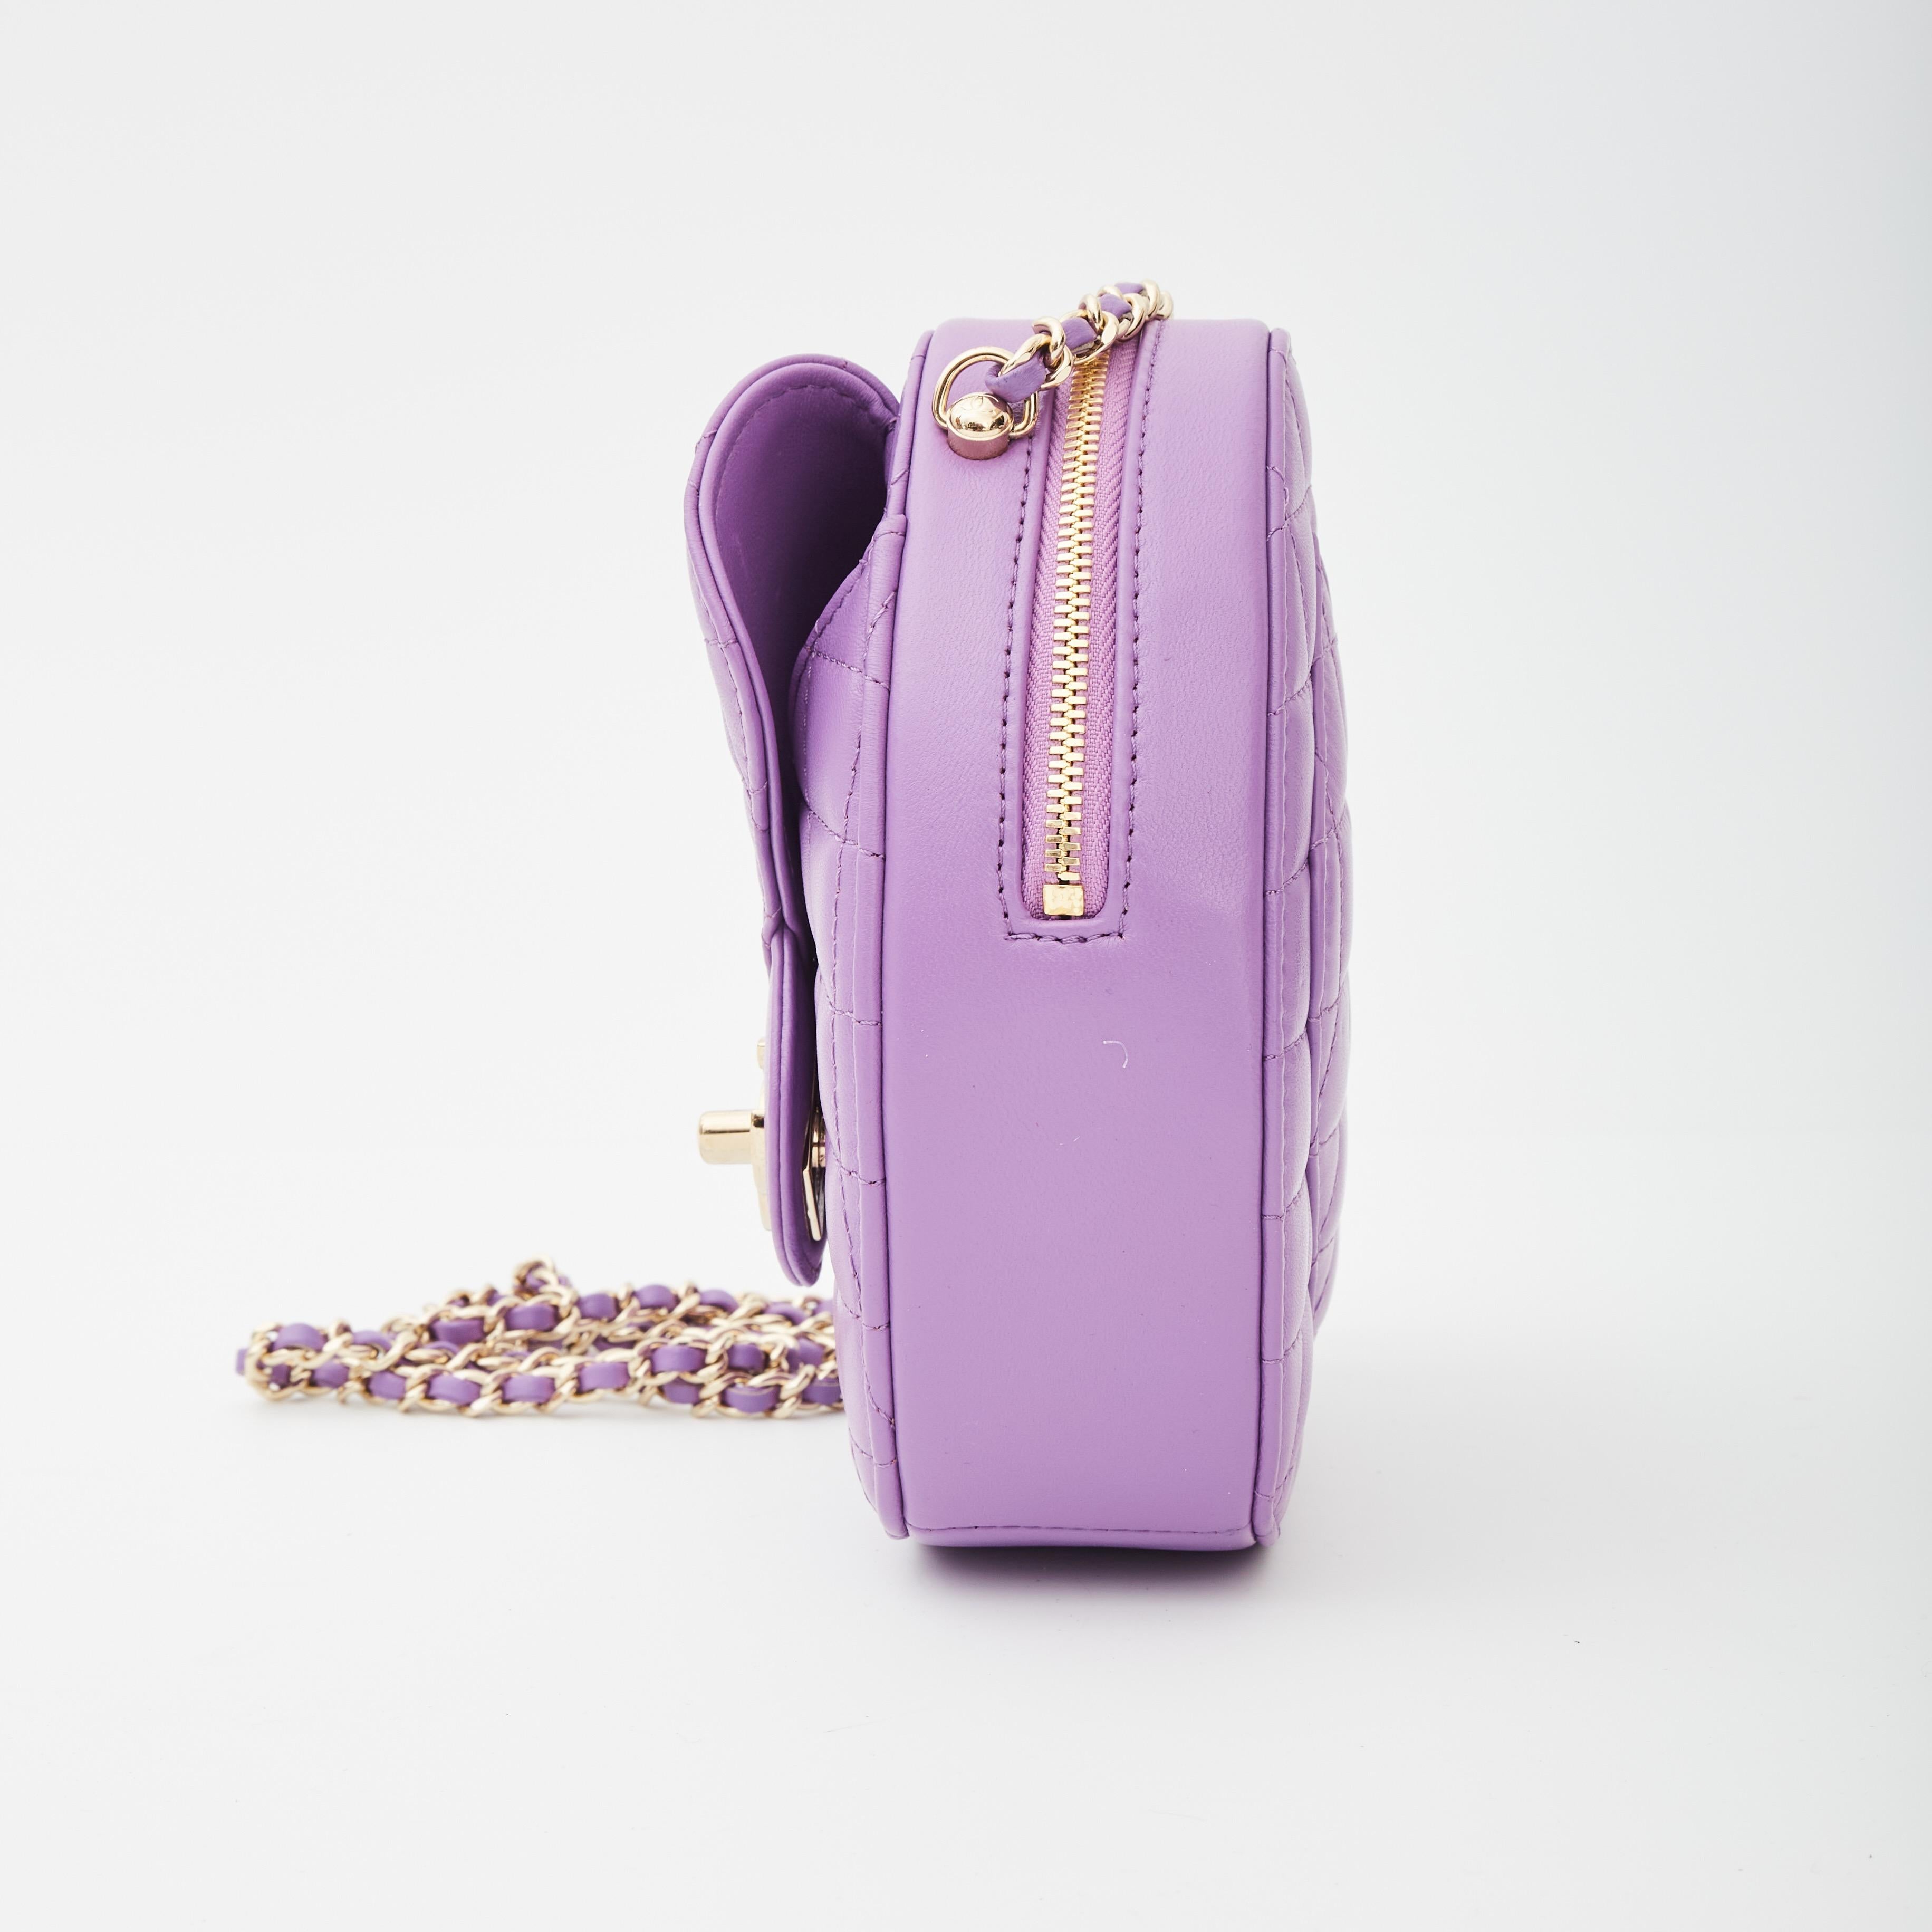 COLOR: Purple
MATERIAL: Lambskin
CODE: JL4NG4CO
MEASURES: H 6.5” x L 7” x D 2”
DROP: 21”
COMES WITH: Dust bag, box and plastic protector
CONDITION: New

Made in France